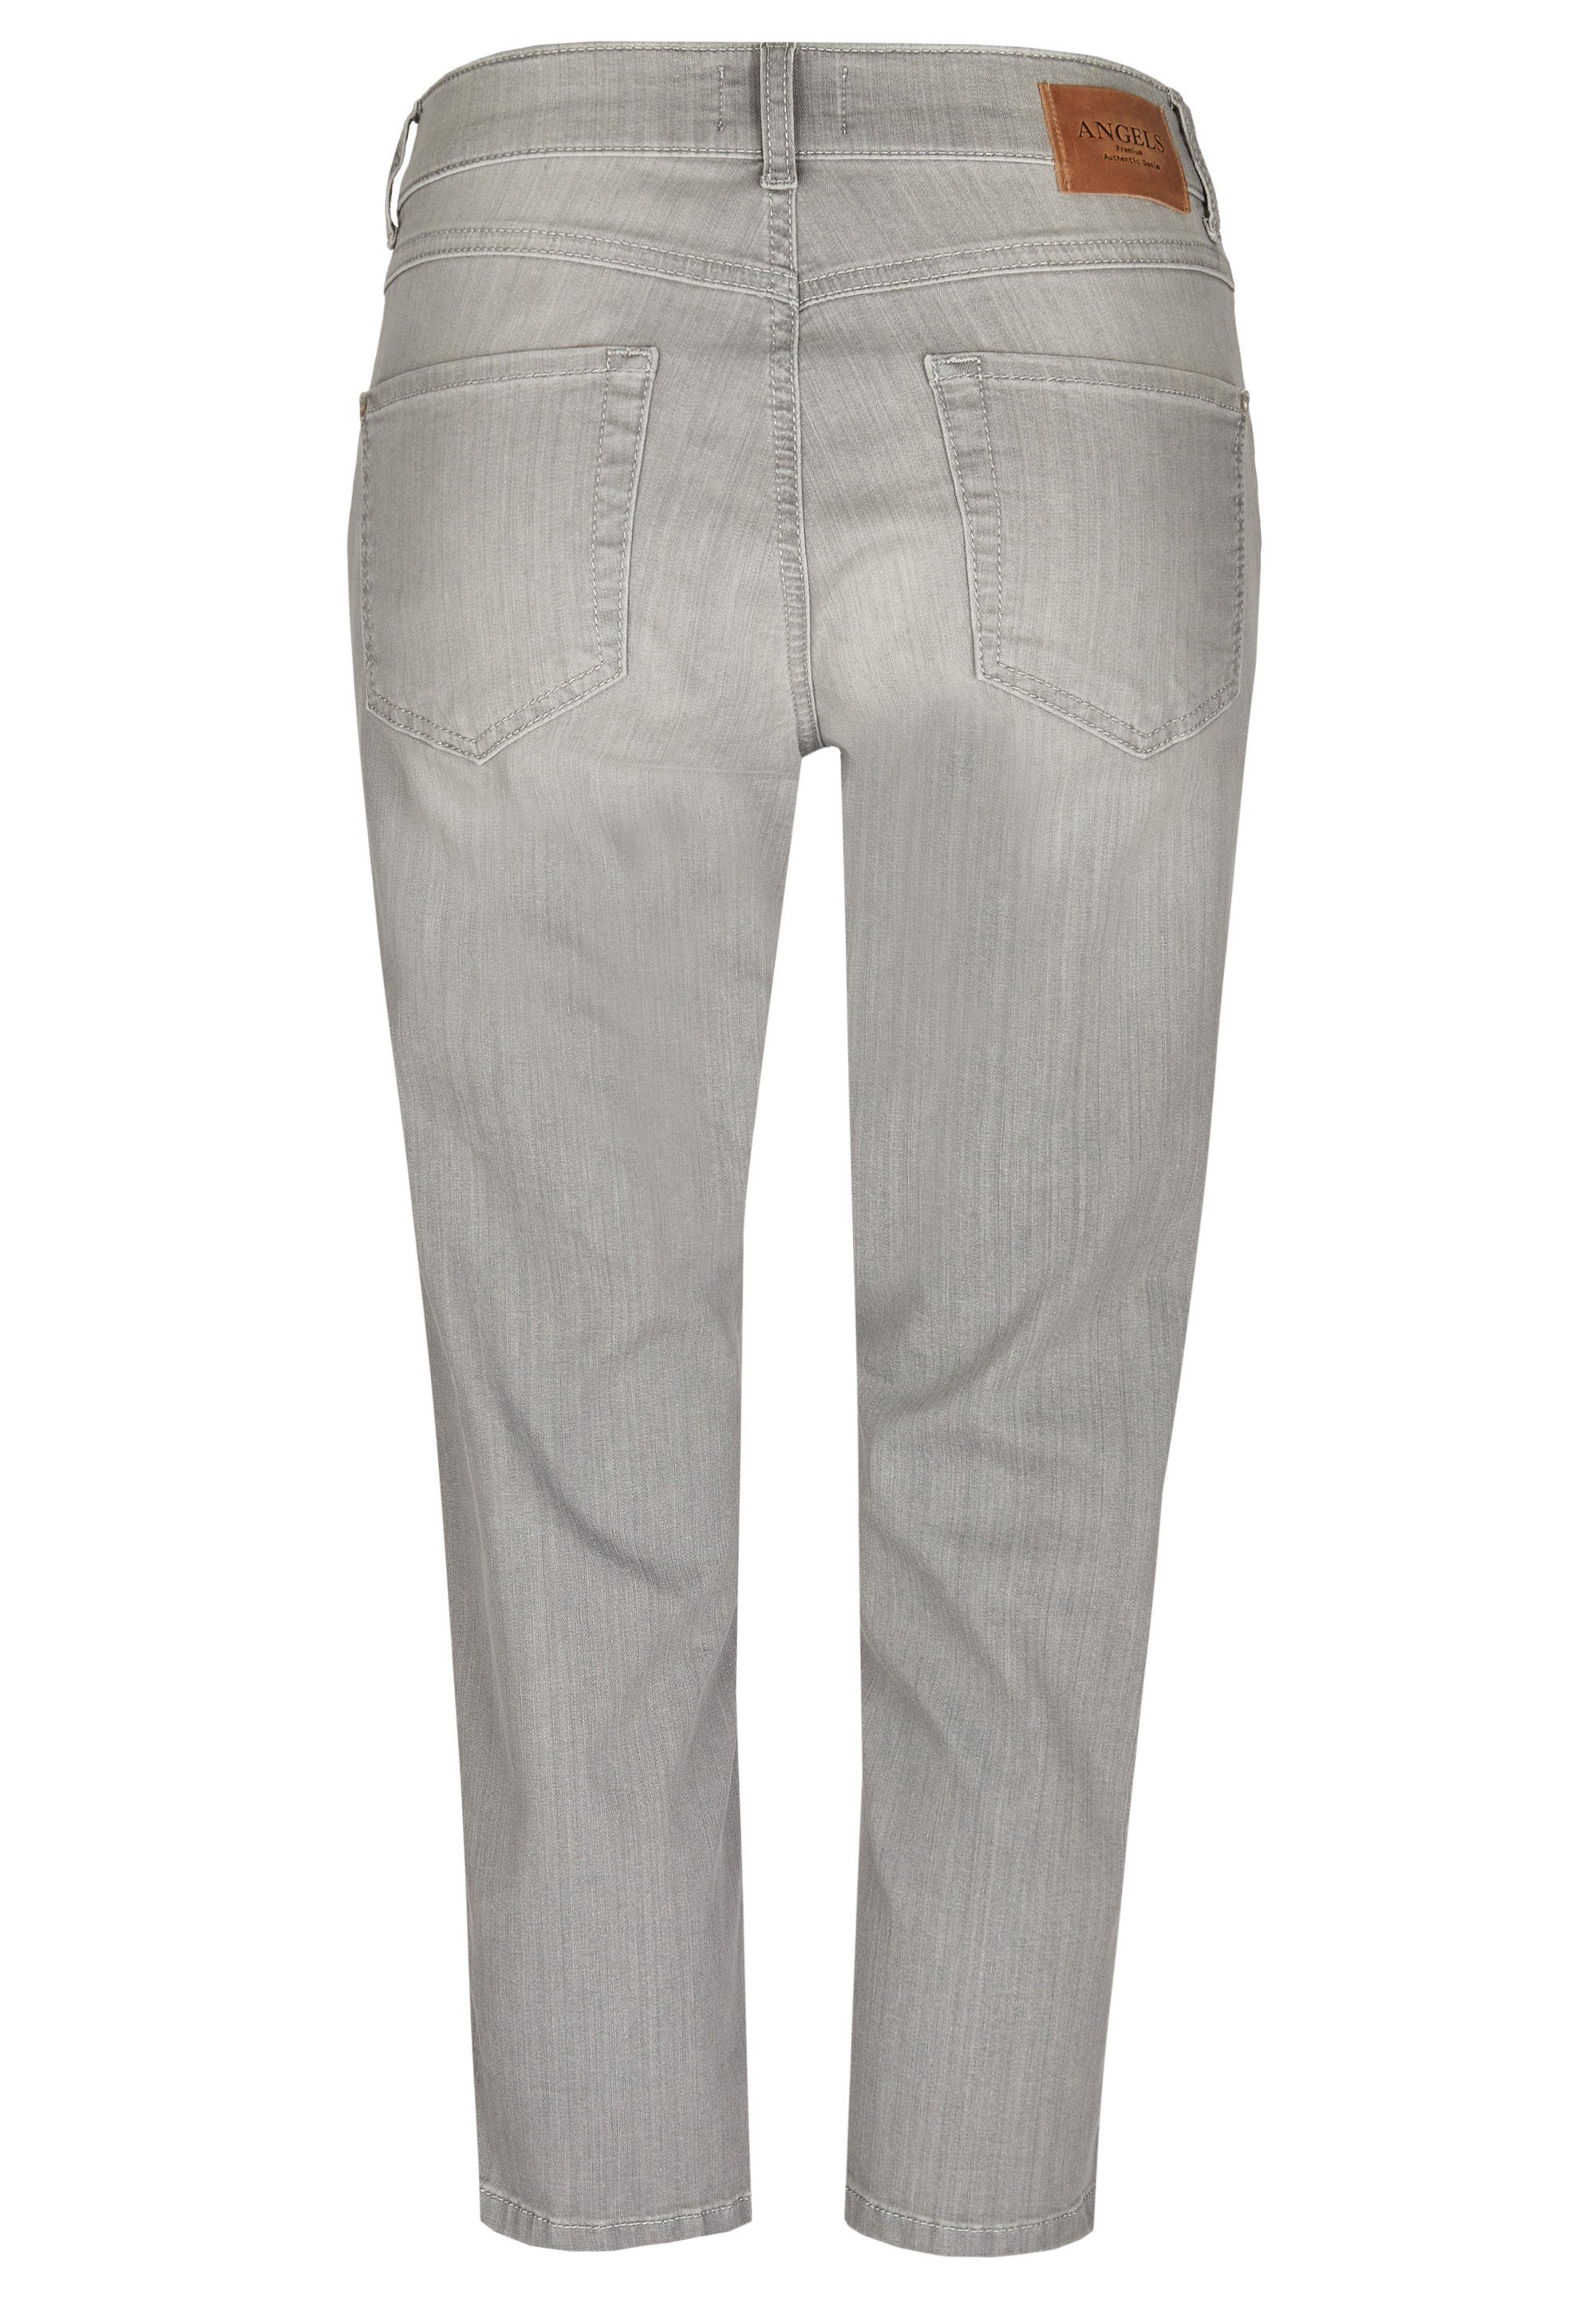 ANGELS Stretch-Jeans ANGELS JEANS CICI TU light 750000.1458 used used 332 grey 1458 grey light